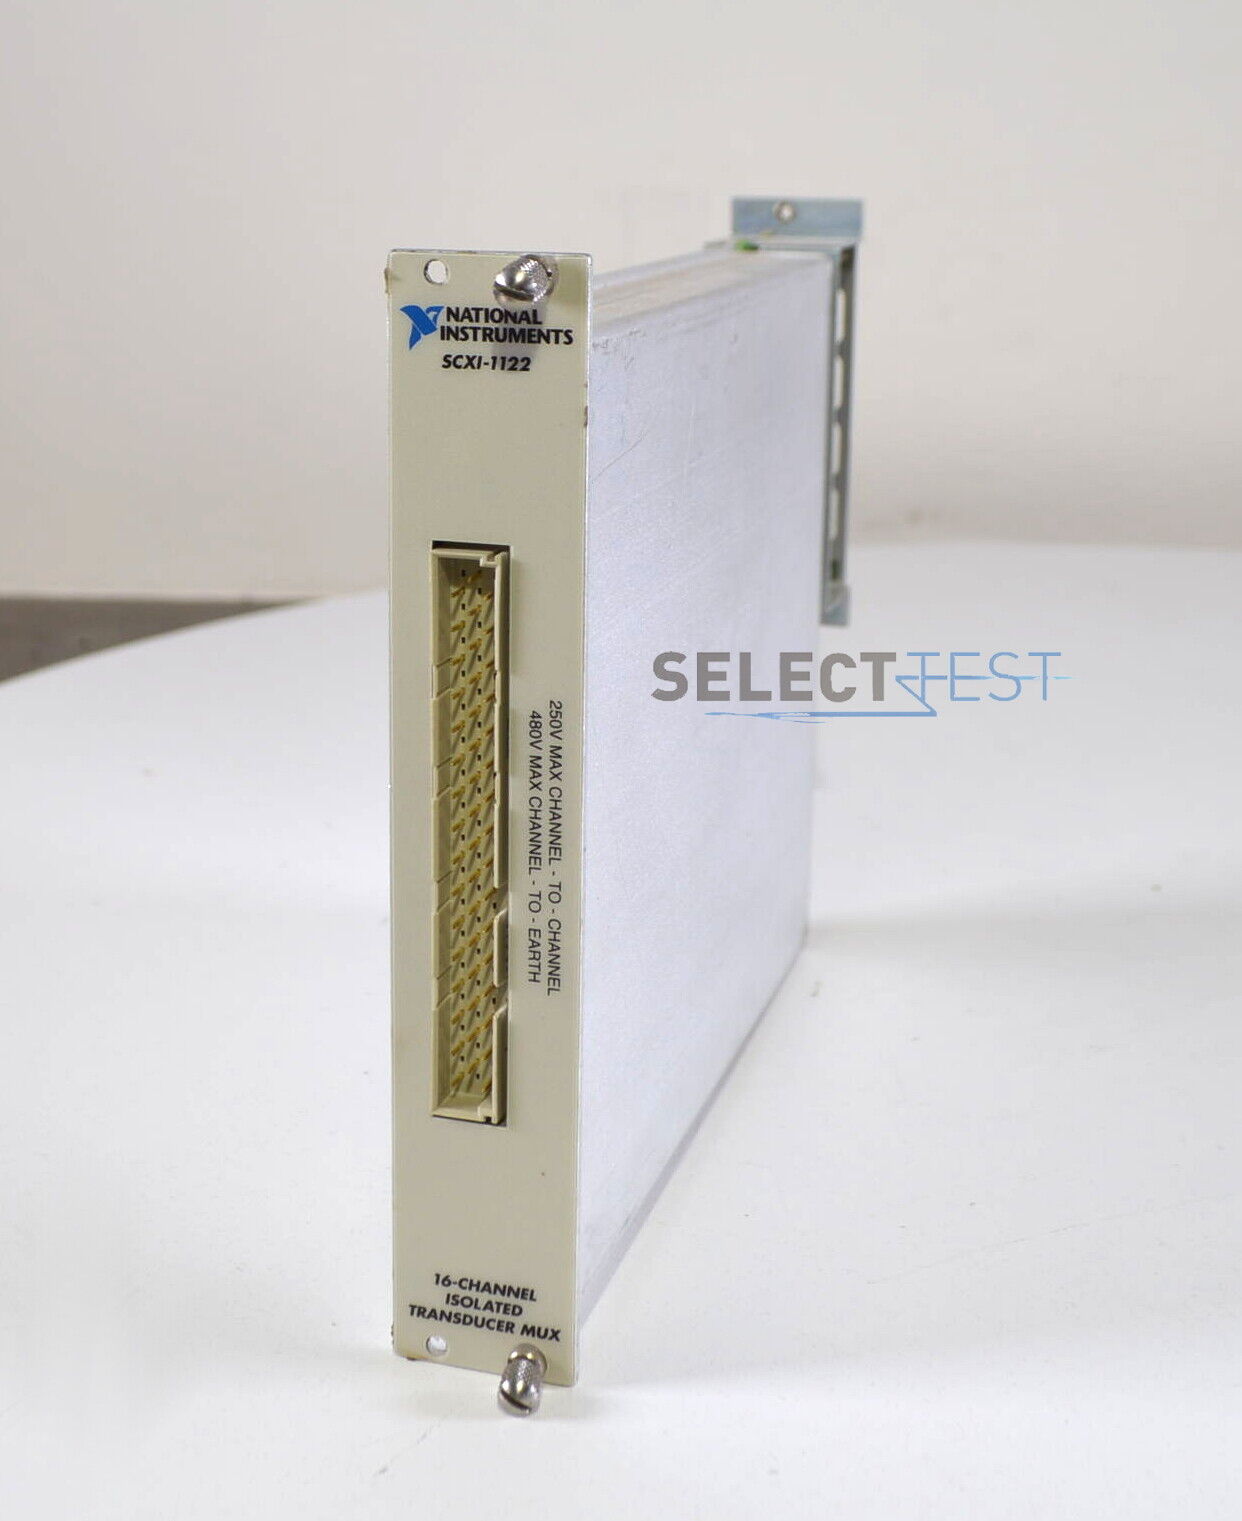 NATIONAL INSTRUMENTS SCXI-1122 16-CHANNEL ISOLATED TRANSDUCER MULTIPLEXER MODULE